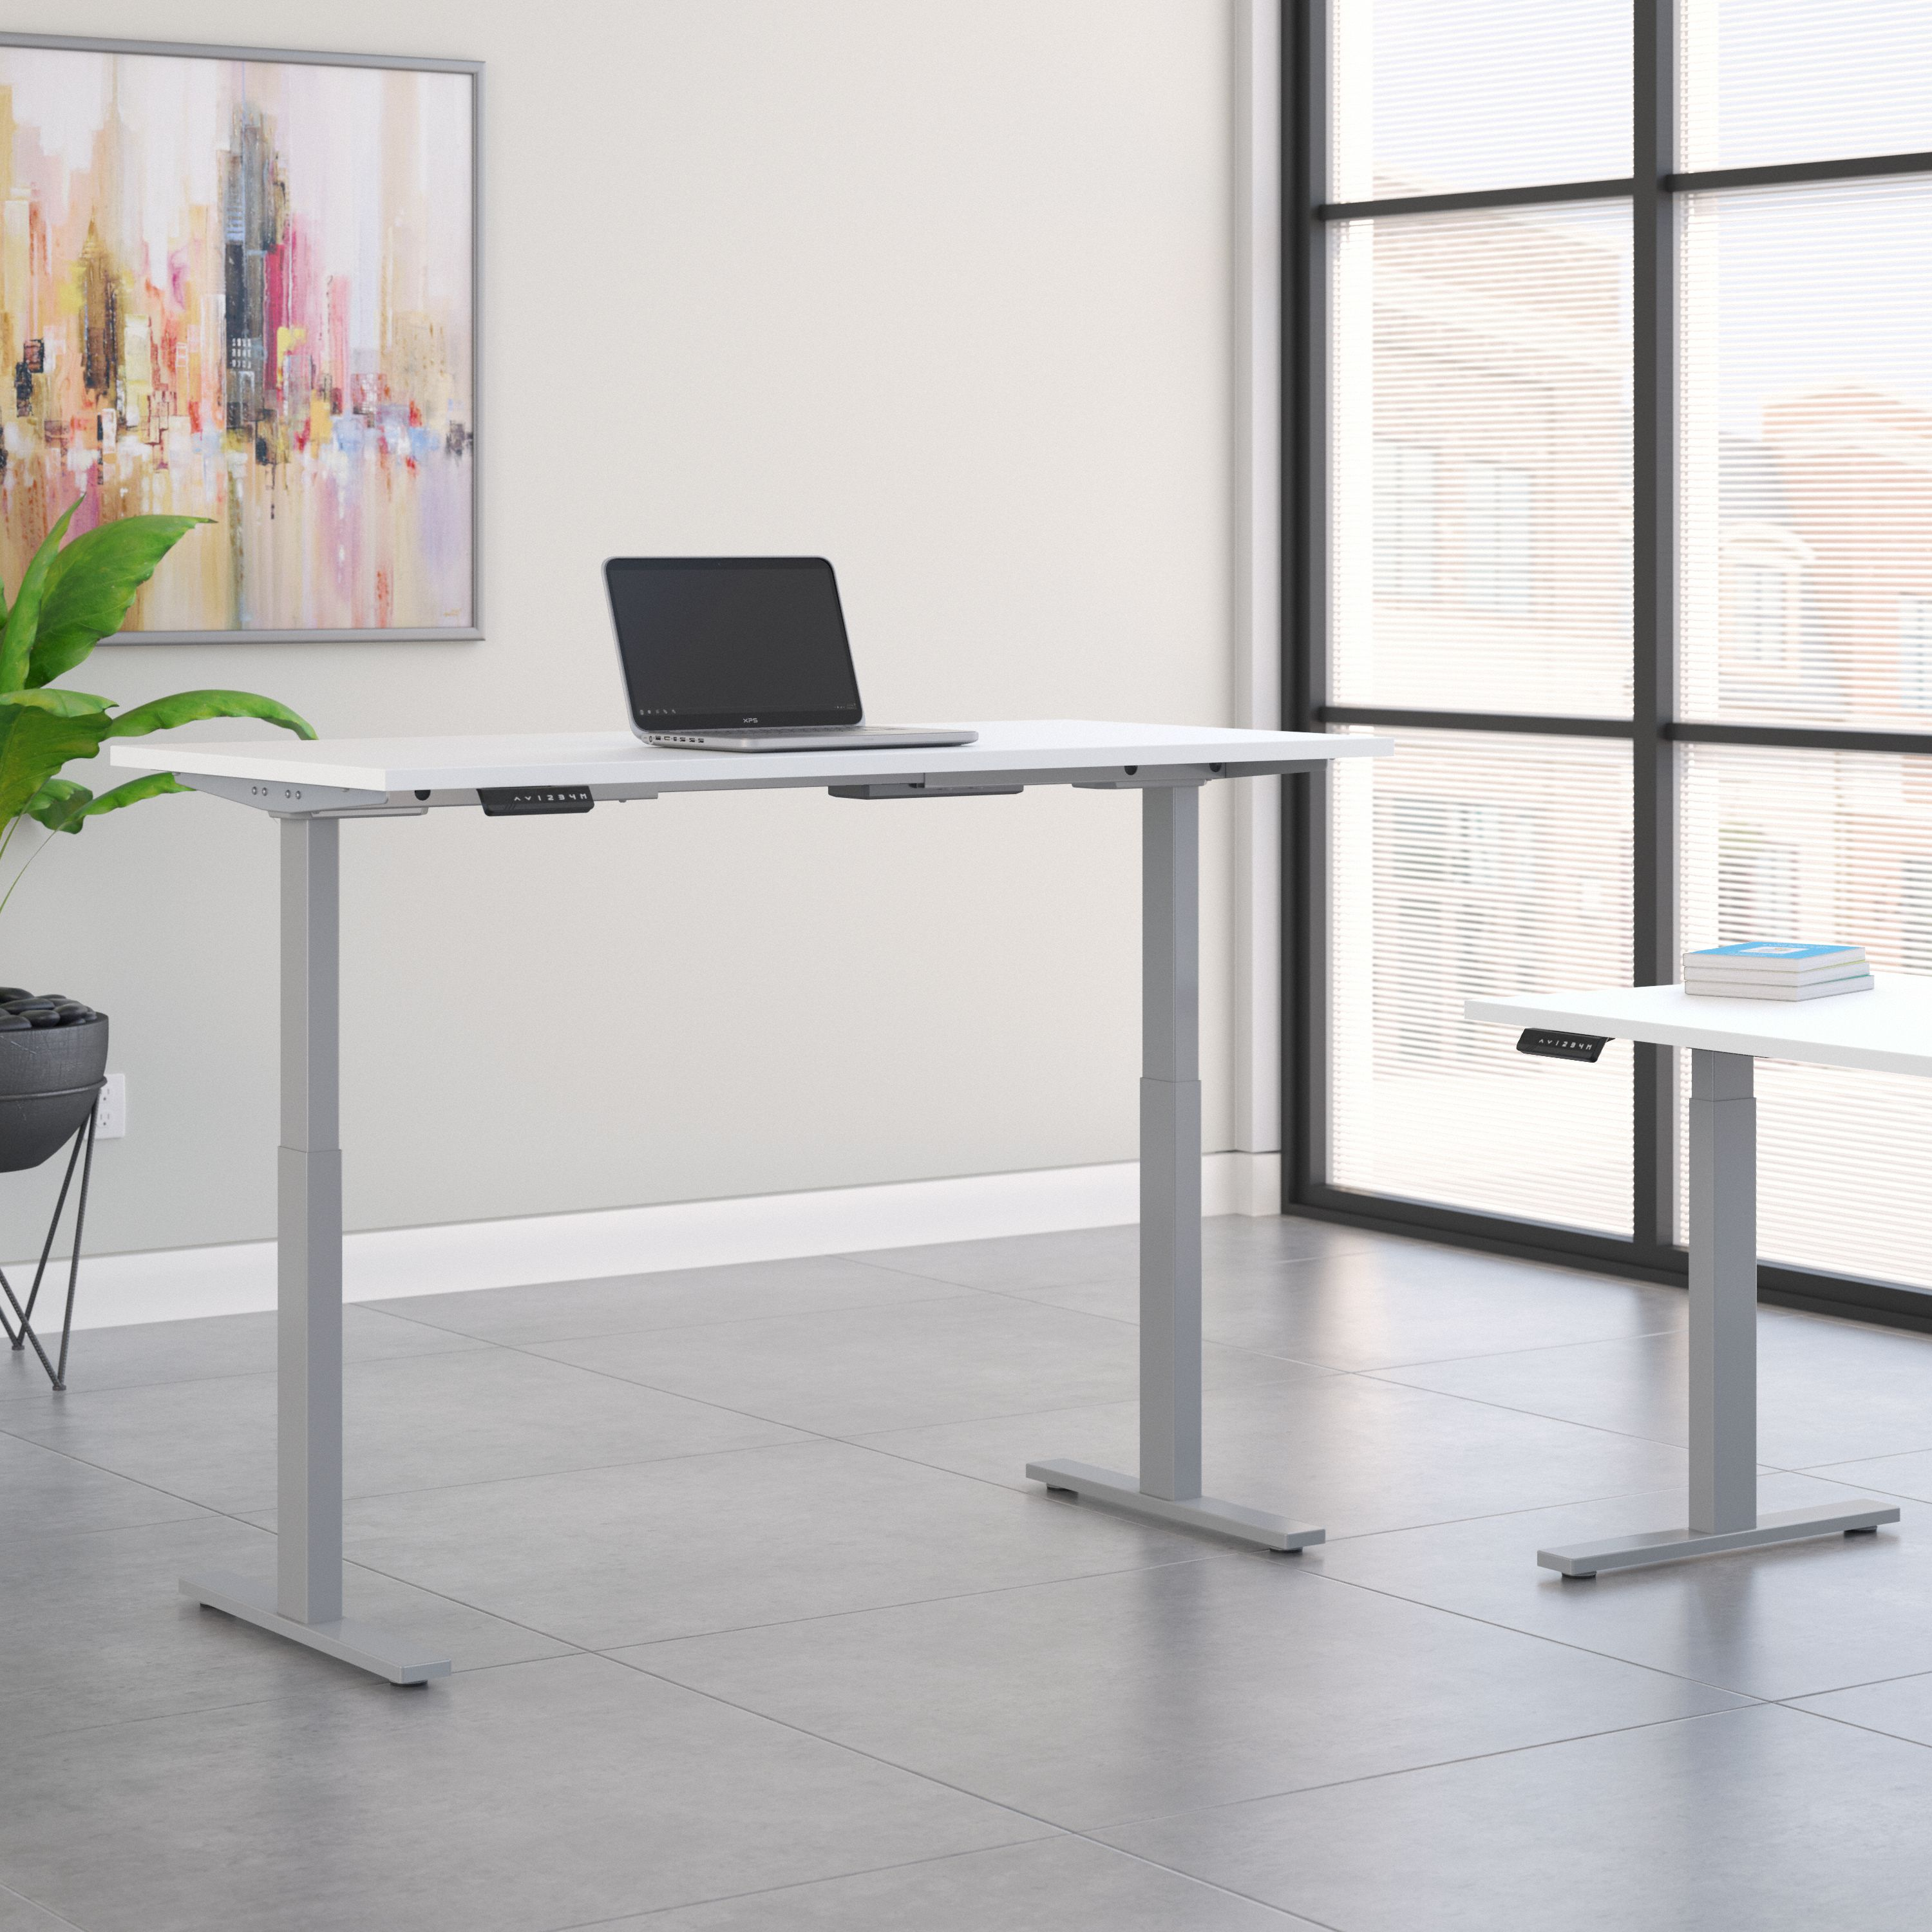 Shop Move 60 Series by Bush Business Furniture 72W x 30D Height Adjustable Standing Desk 01 M6S7230WHSK #color_white/cool gray metallic